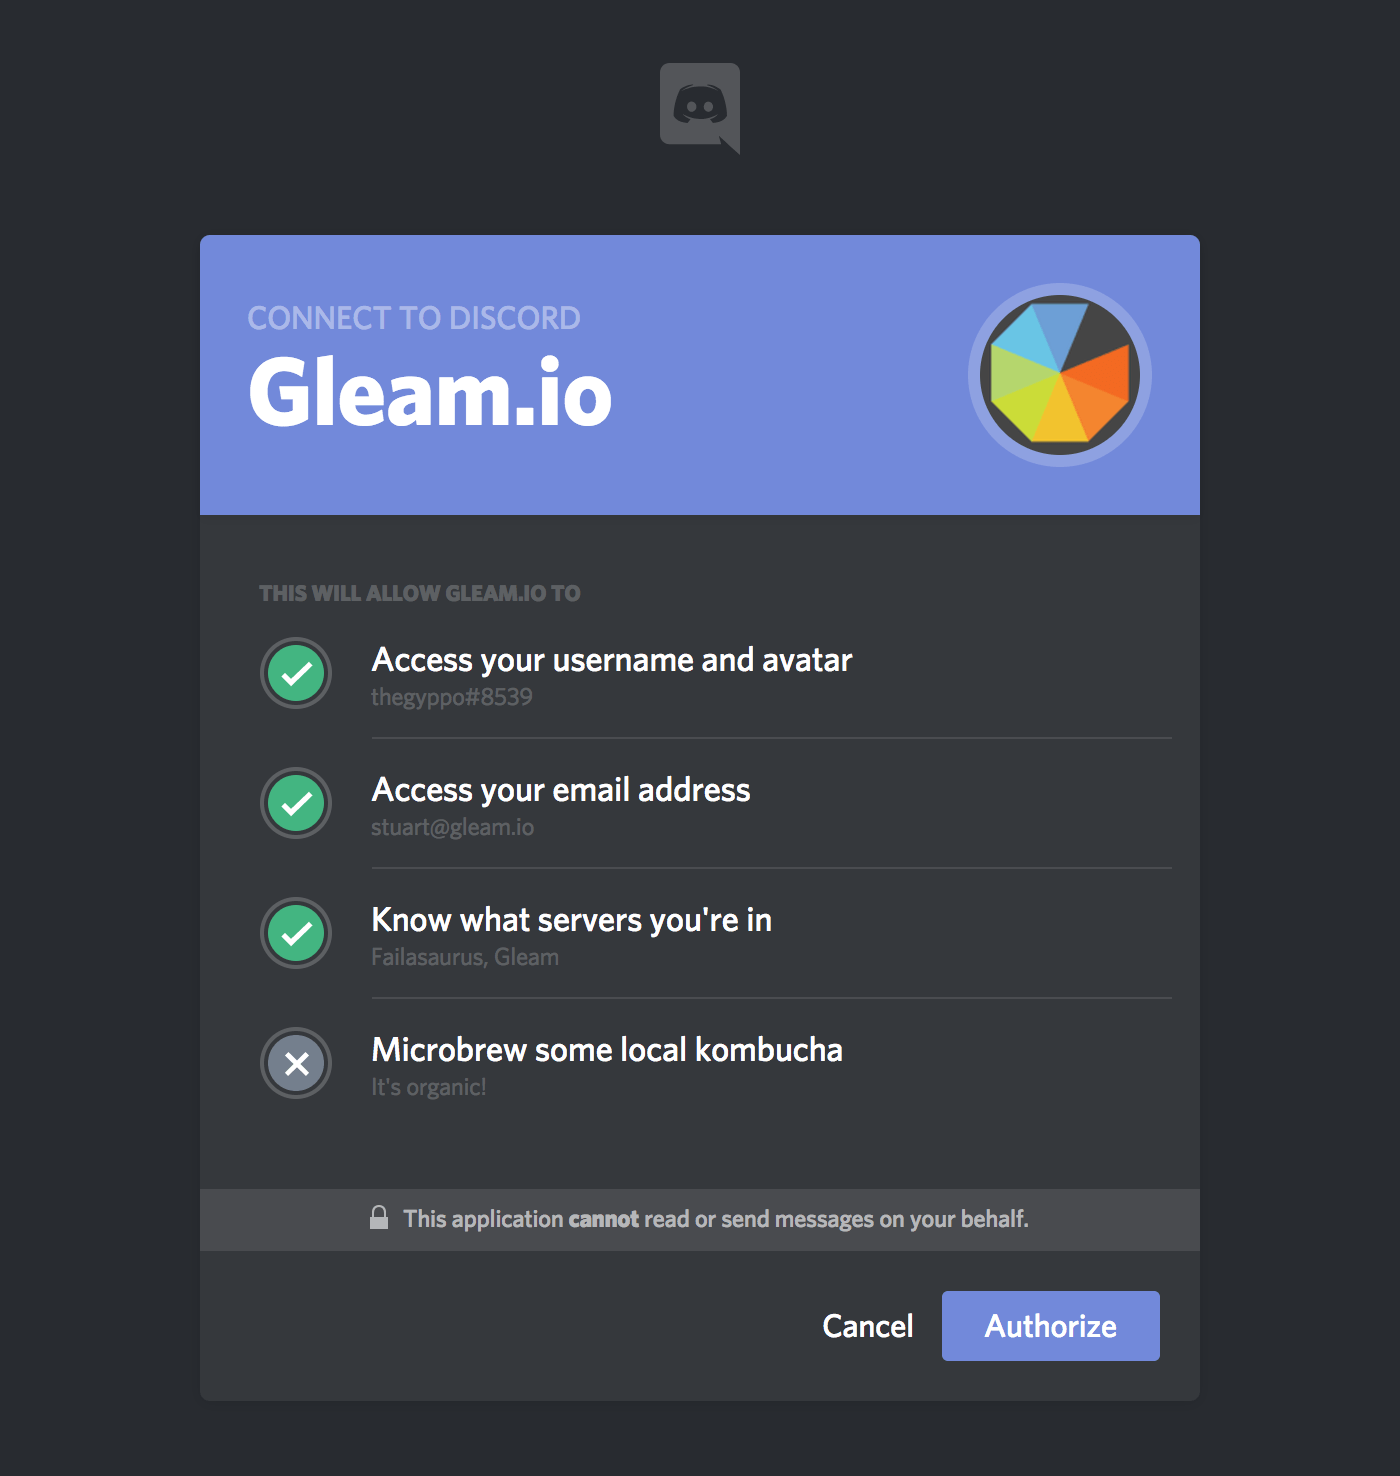 Interface to connect Gleam.io to Discord